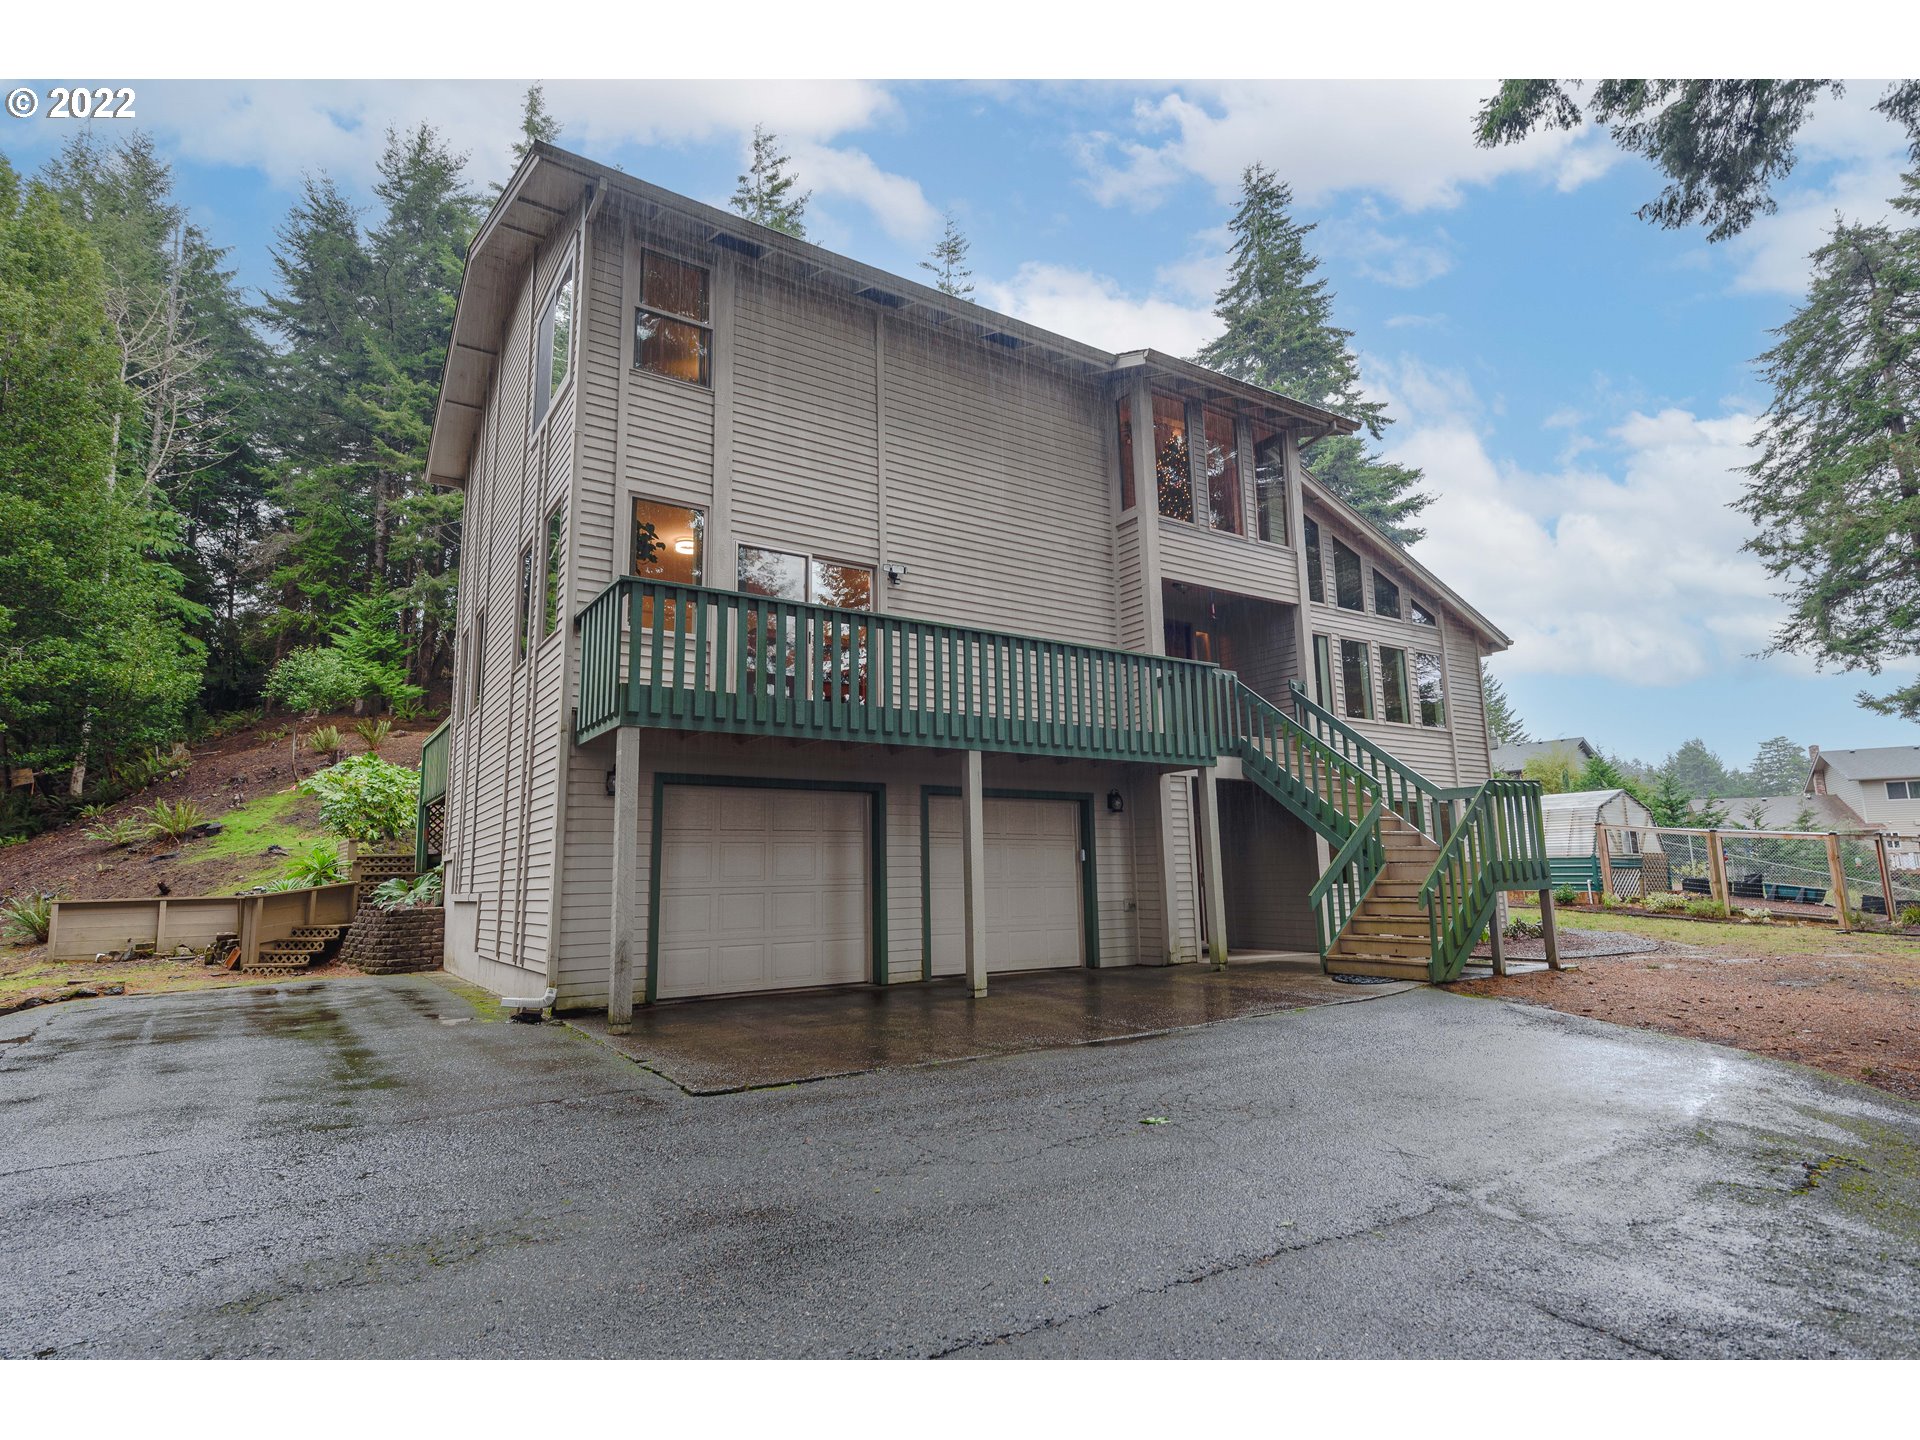 2395 PONY CREEK RD, North Bend, OR 97459